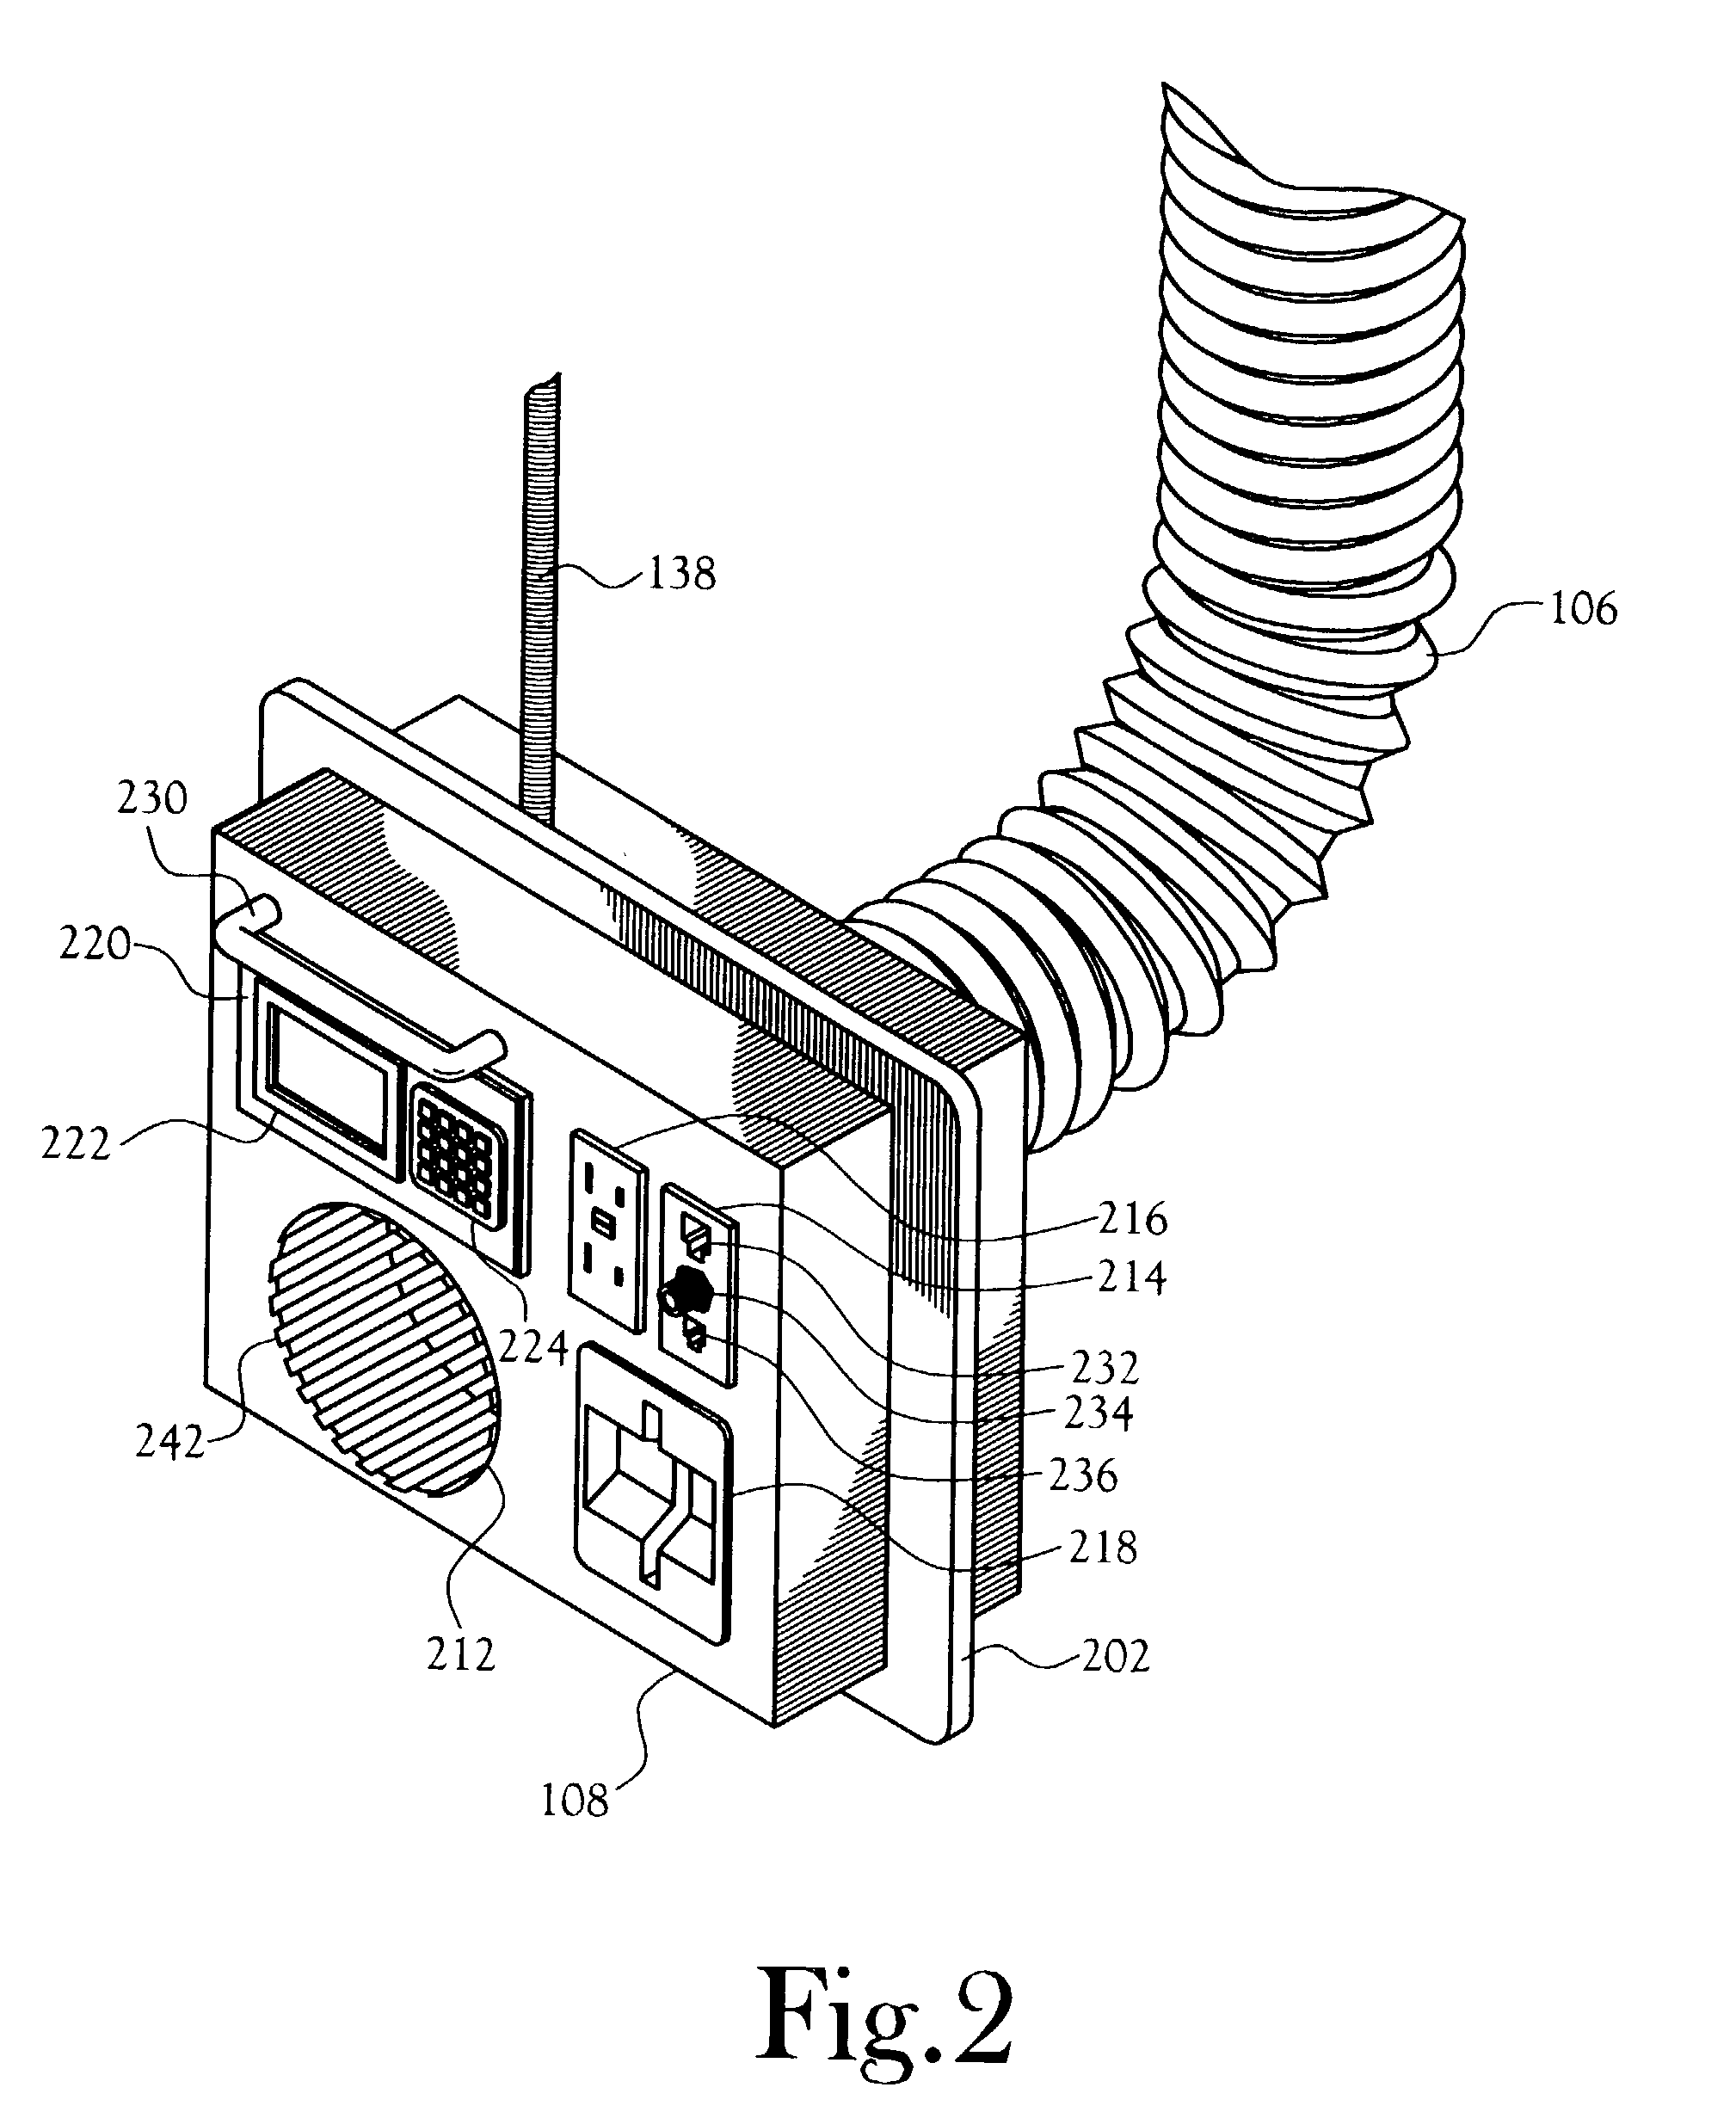 Apparatus for providing convenience services to stationary vehicles